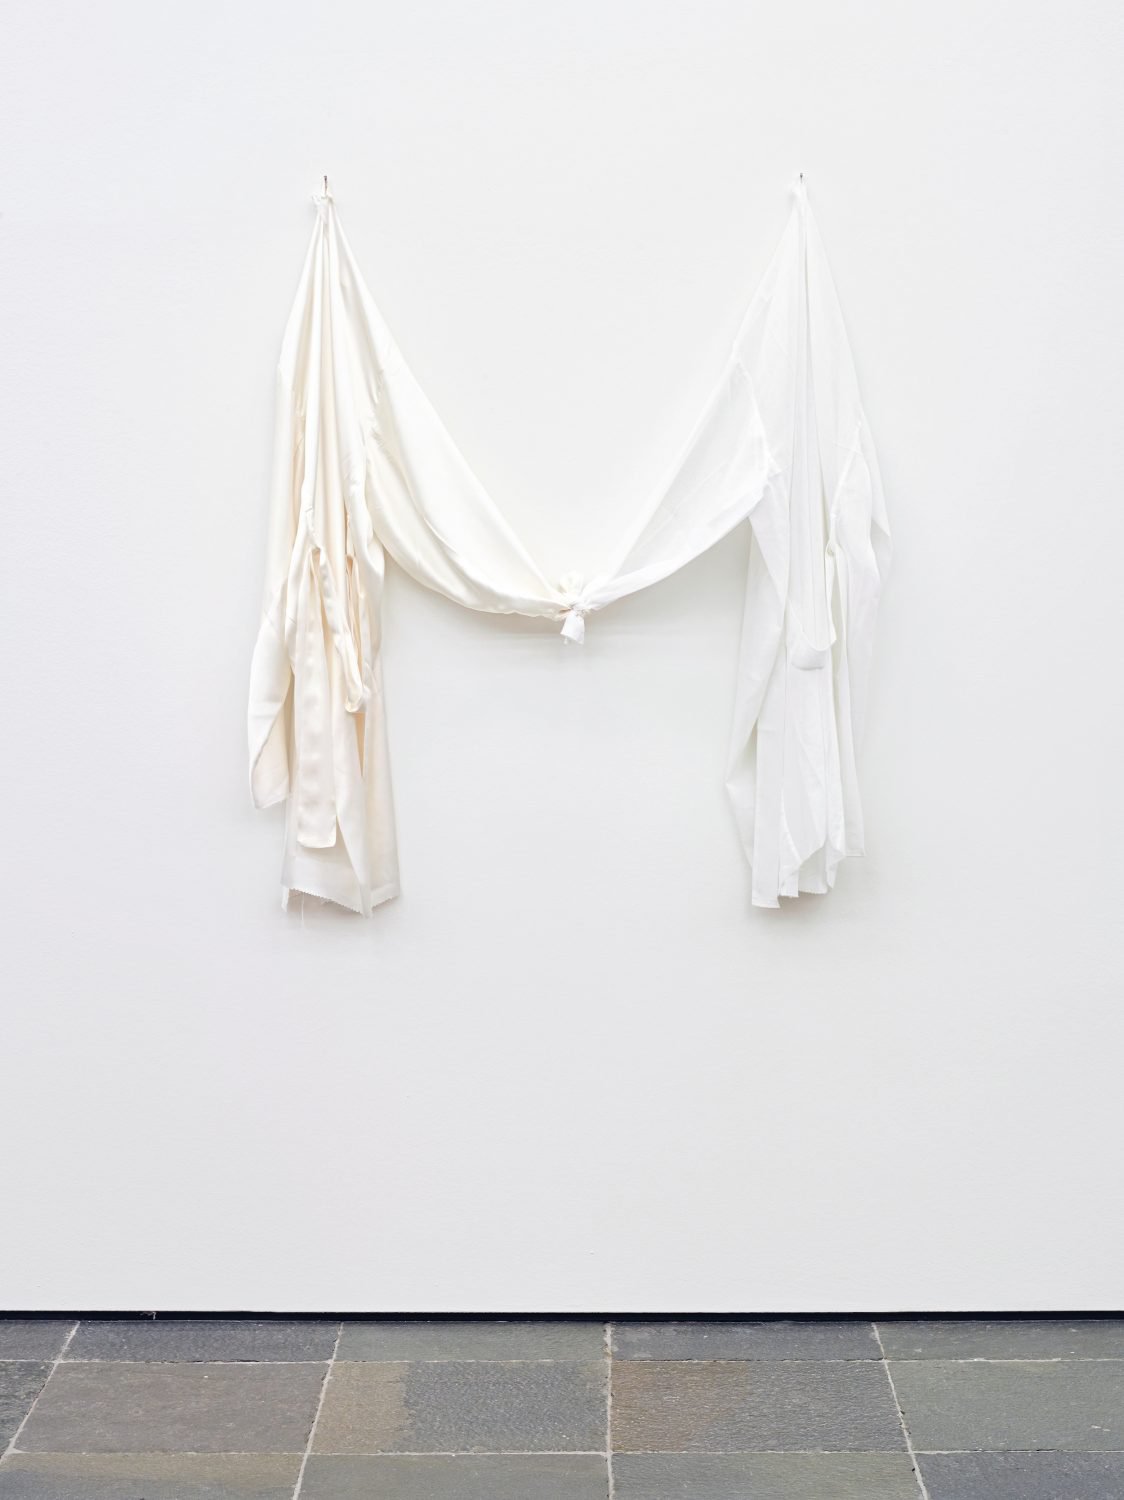 Anna-Sophie Bergerwhen I am with you / when I am not there, 2014Silk satin, cotton batiste, threadDimensions variable